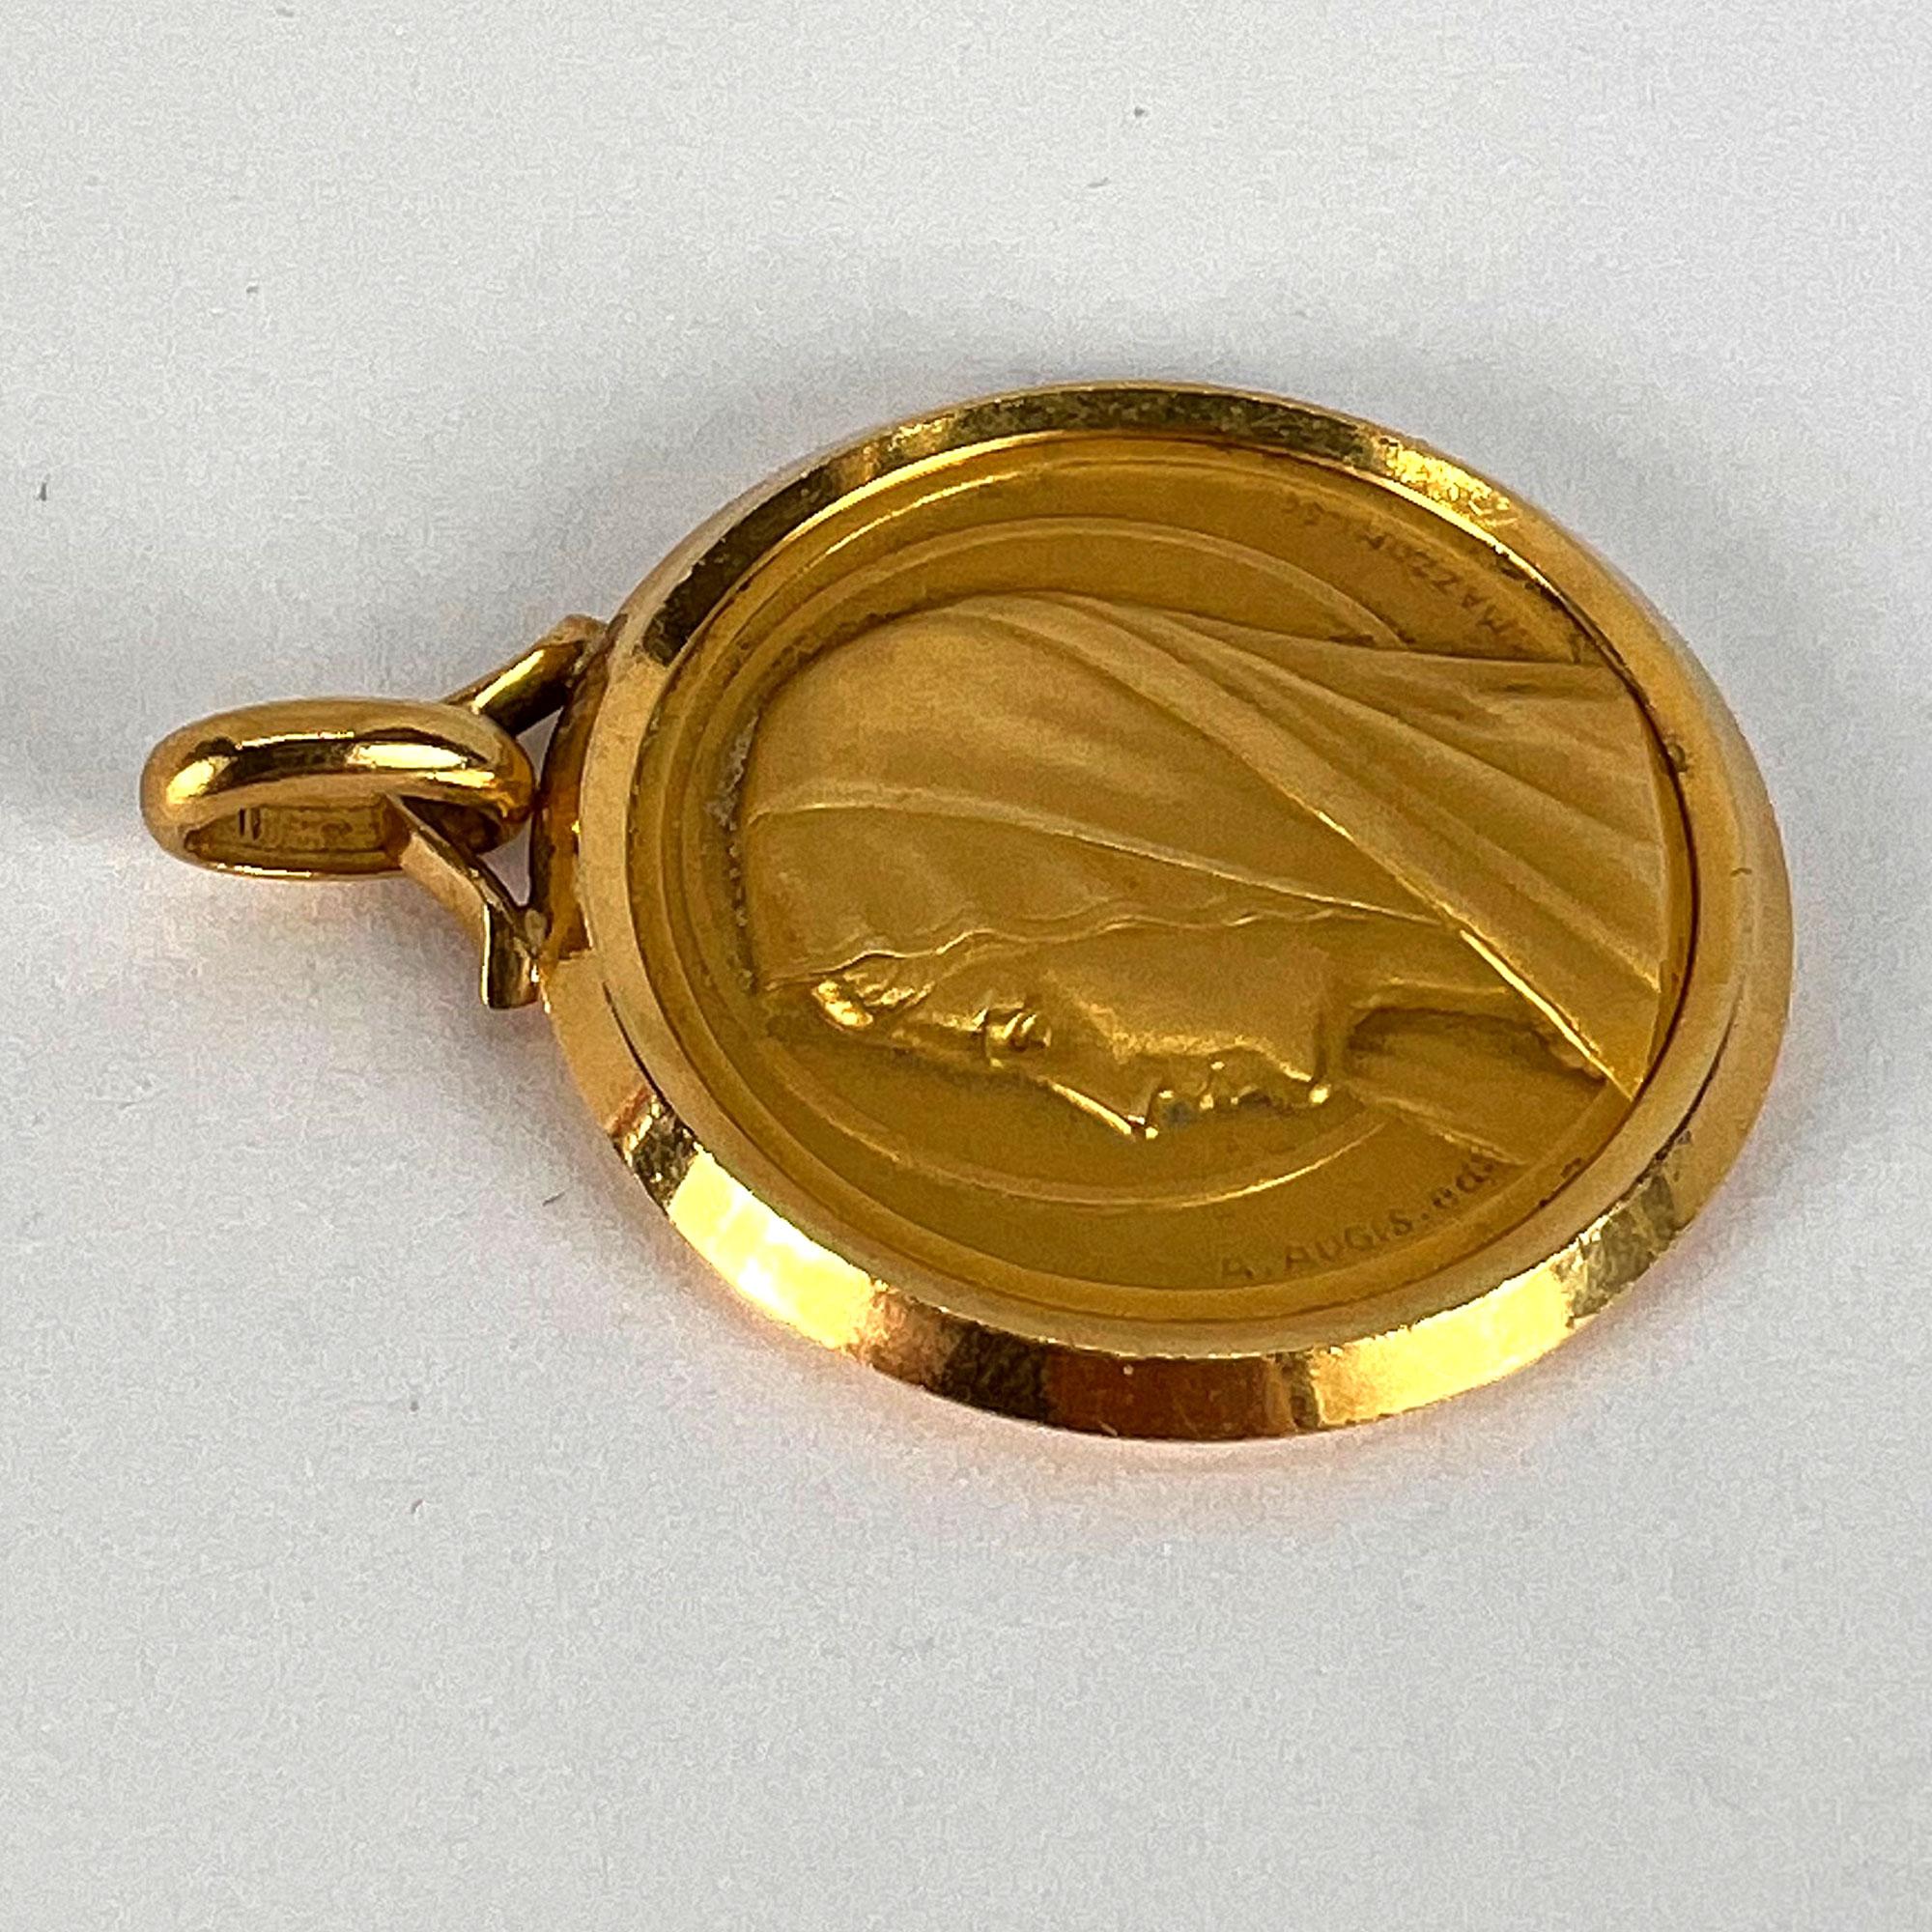 French Augis Mazzoni Virgin Mary 18K Yellow Gold Pendant For Sale 3